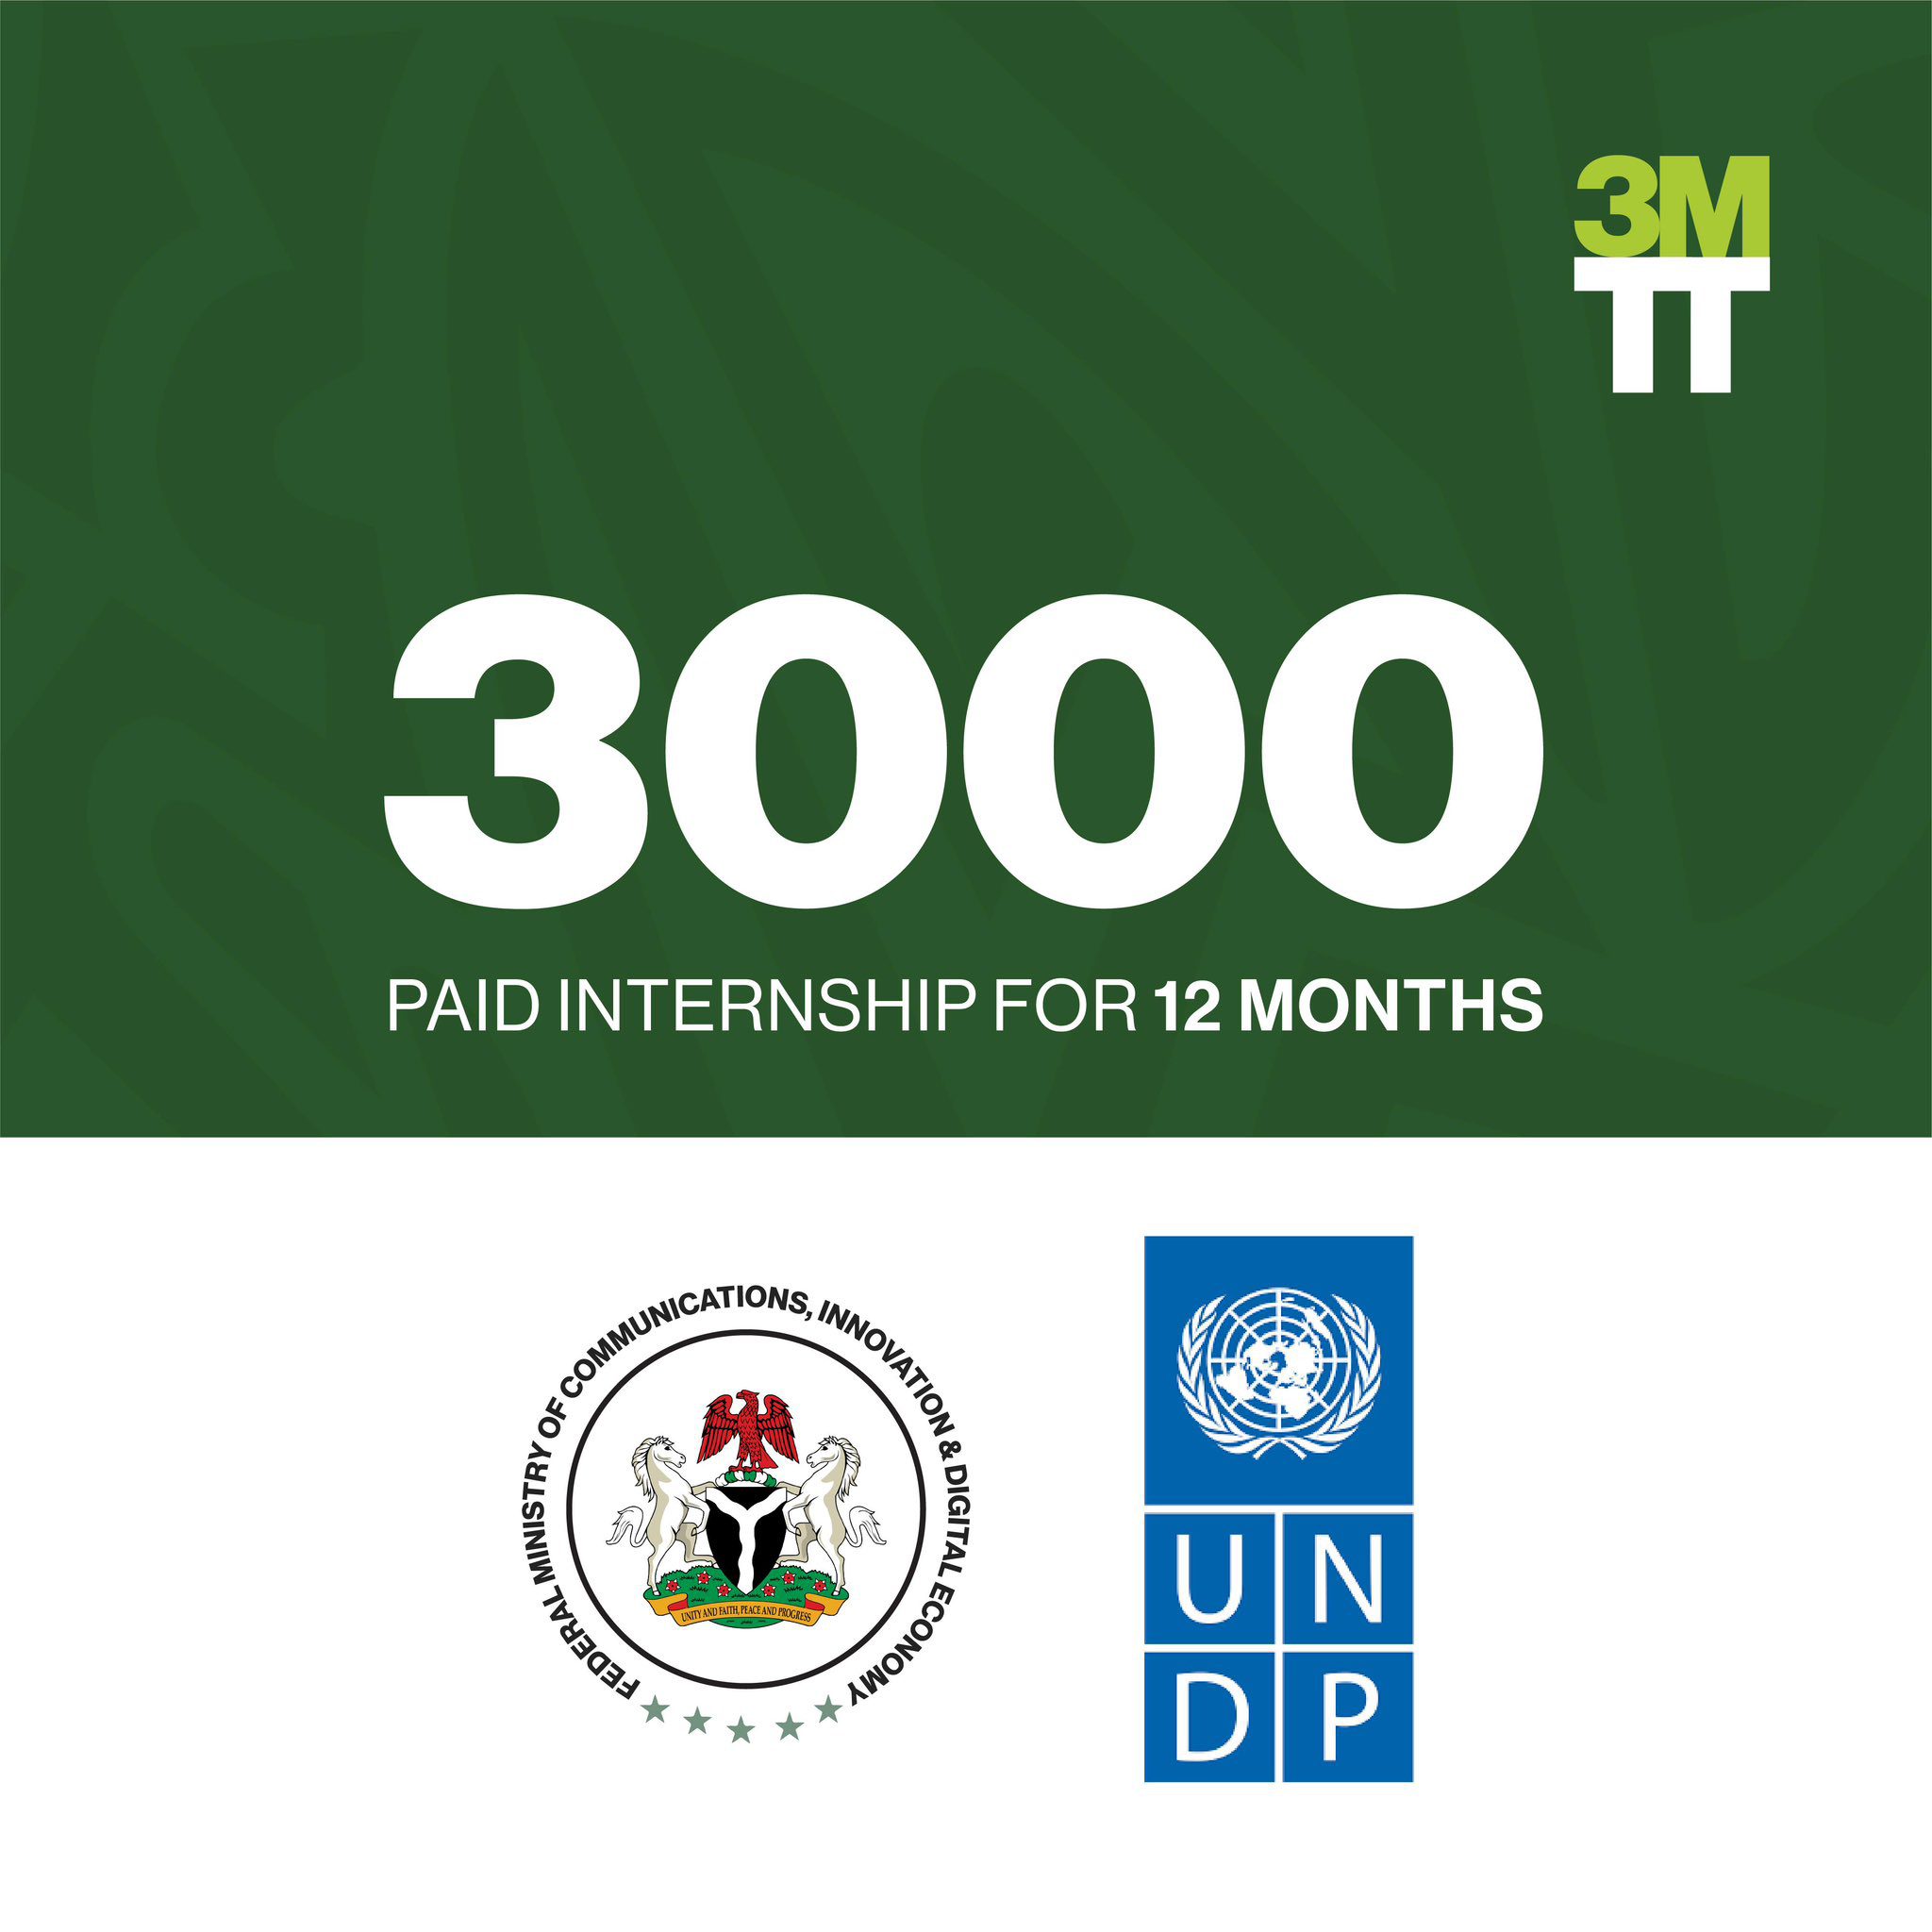 NITDA Partners with UNDP to Provide 3,000 Paid Internships for 3MTT Program Participants